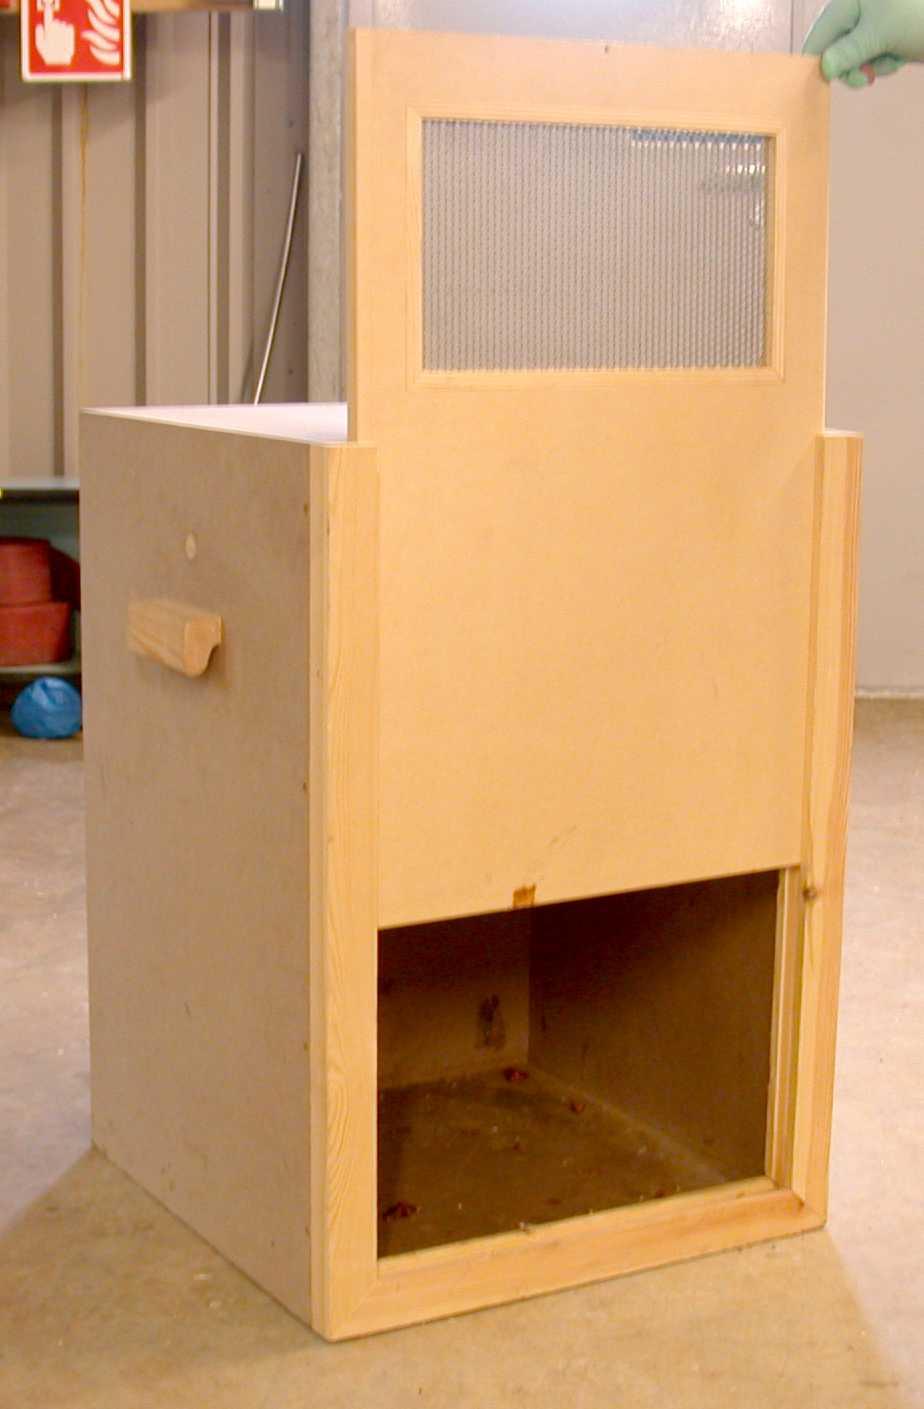 A wooden transport box with a sliding opening that can be closed once a macaque enters